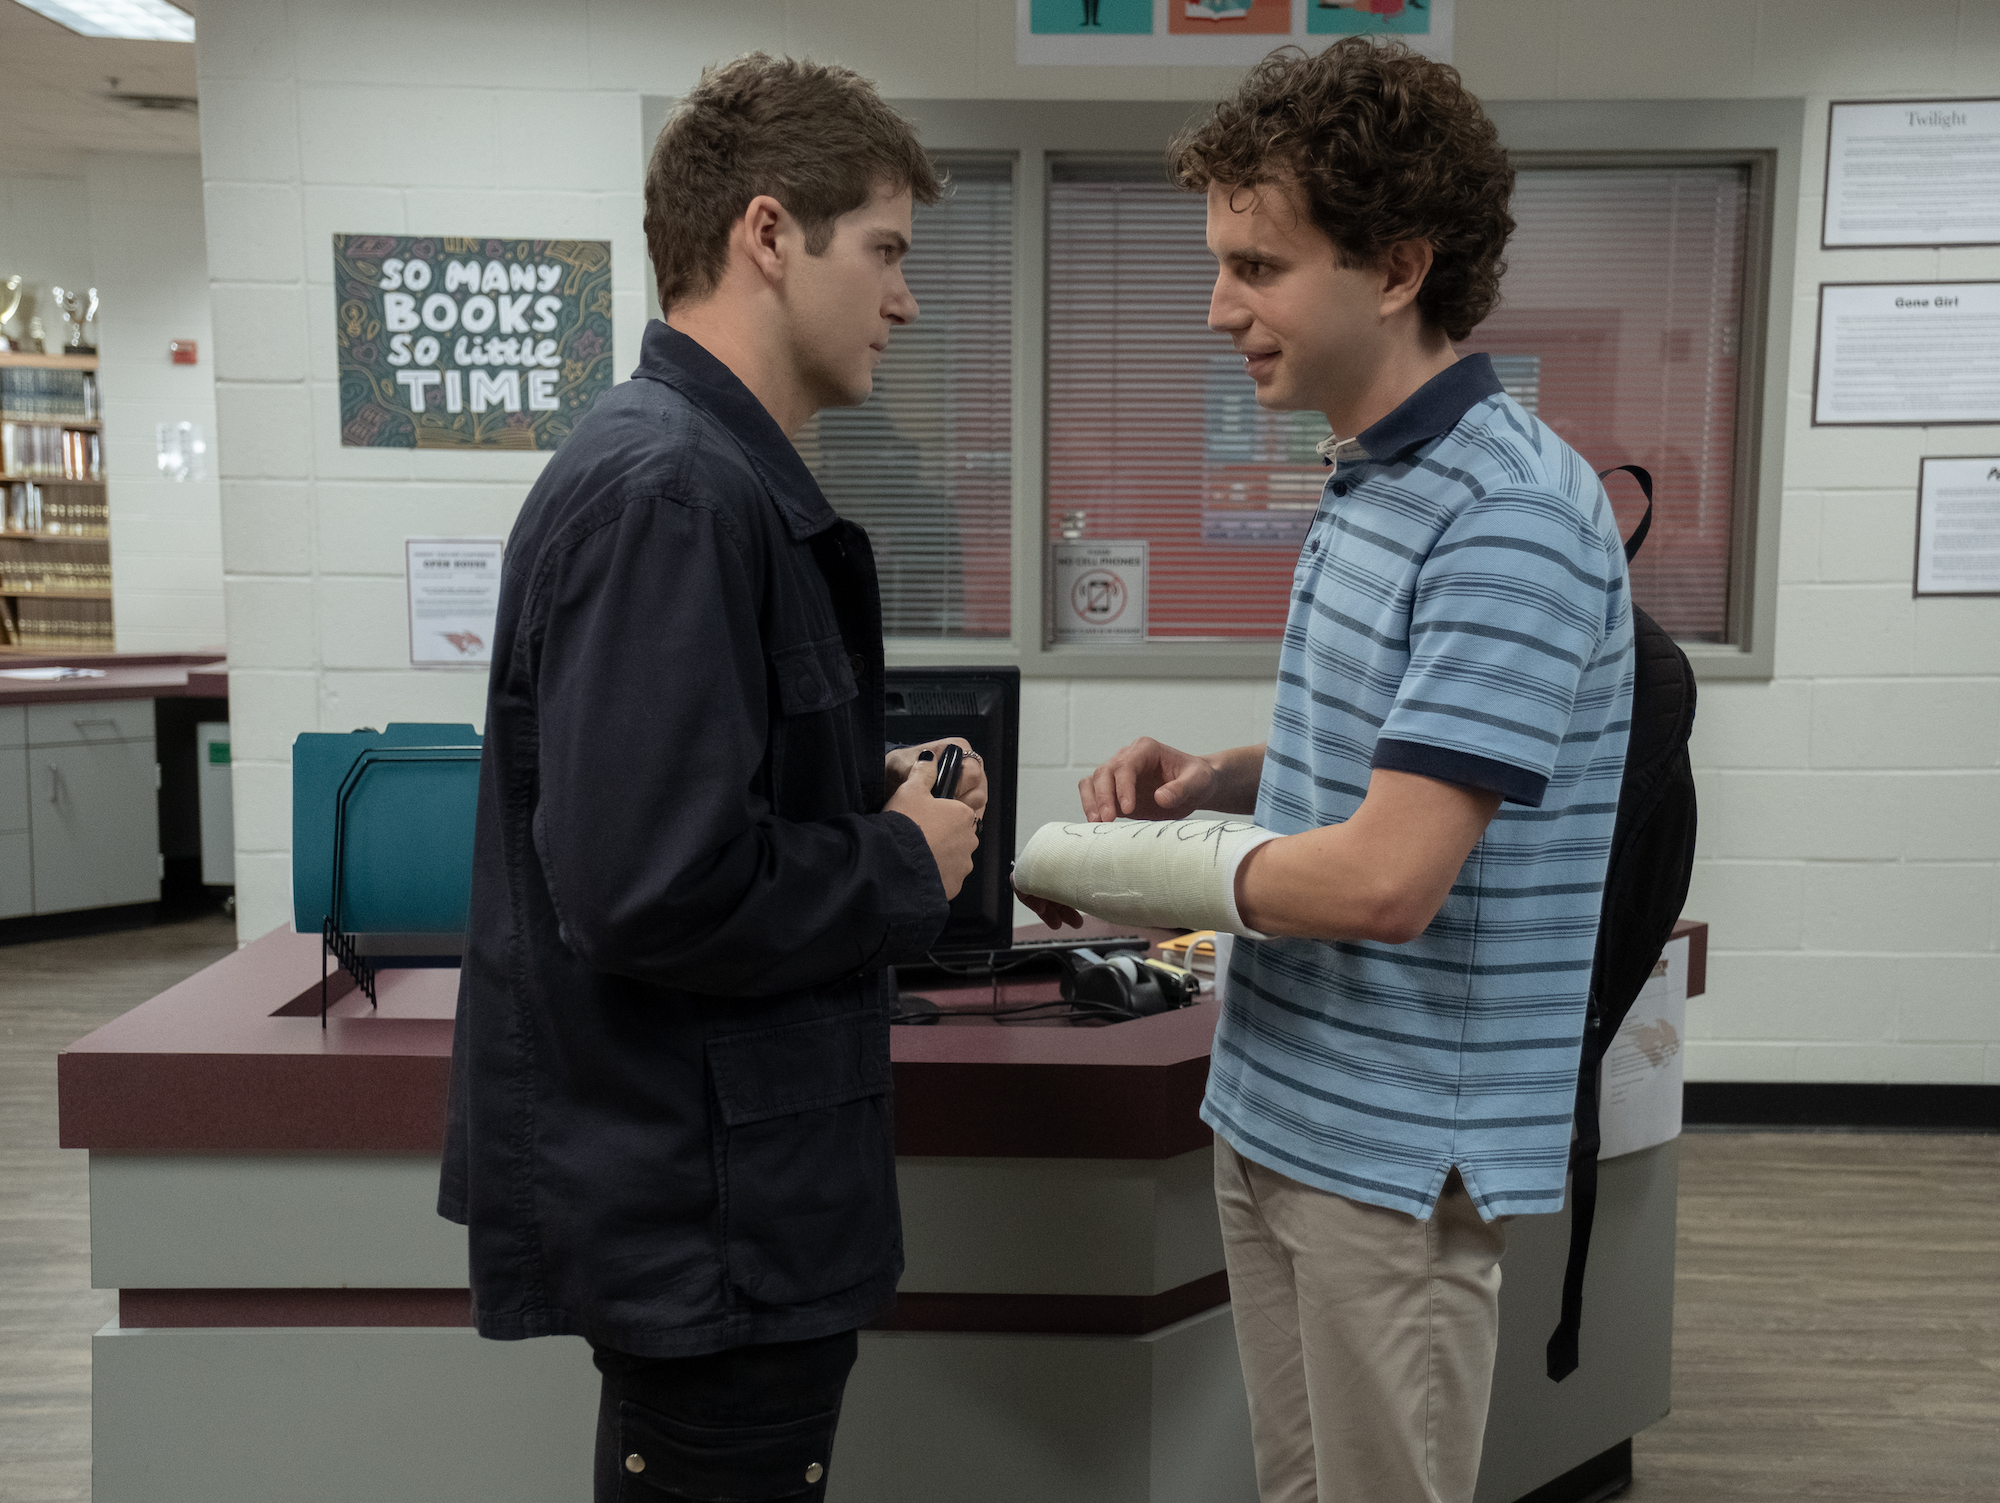 Colton Ryan and Ben Platt as Connor Murphy and Evan Hansen in the 'Dear Evan Hansen' movie. Ryan signs Platt's cast in a high school library. A desk with a computer and blue envelopes is behind them with a window looking out to a hallway. Platt's age in 'Dear Evan Hansen' has been a point of contention since the trailer came out, as people think he looks too old at 27 to be playing a high school student. Ryan is 26 and plays a character the same age as Platt's.